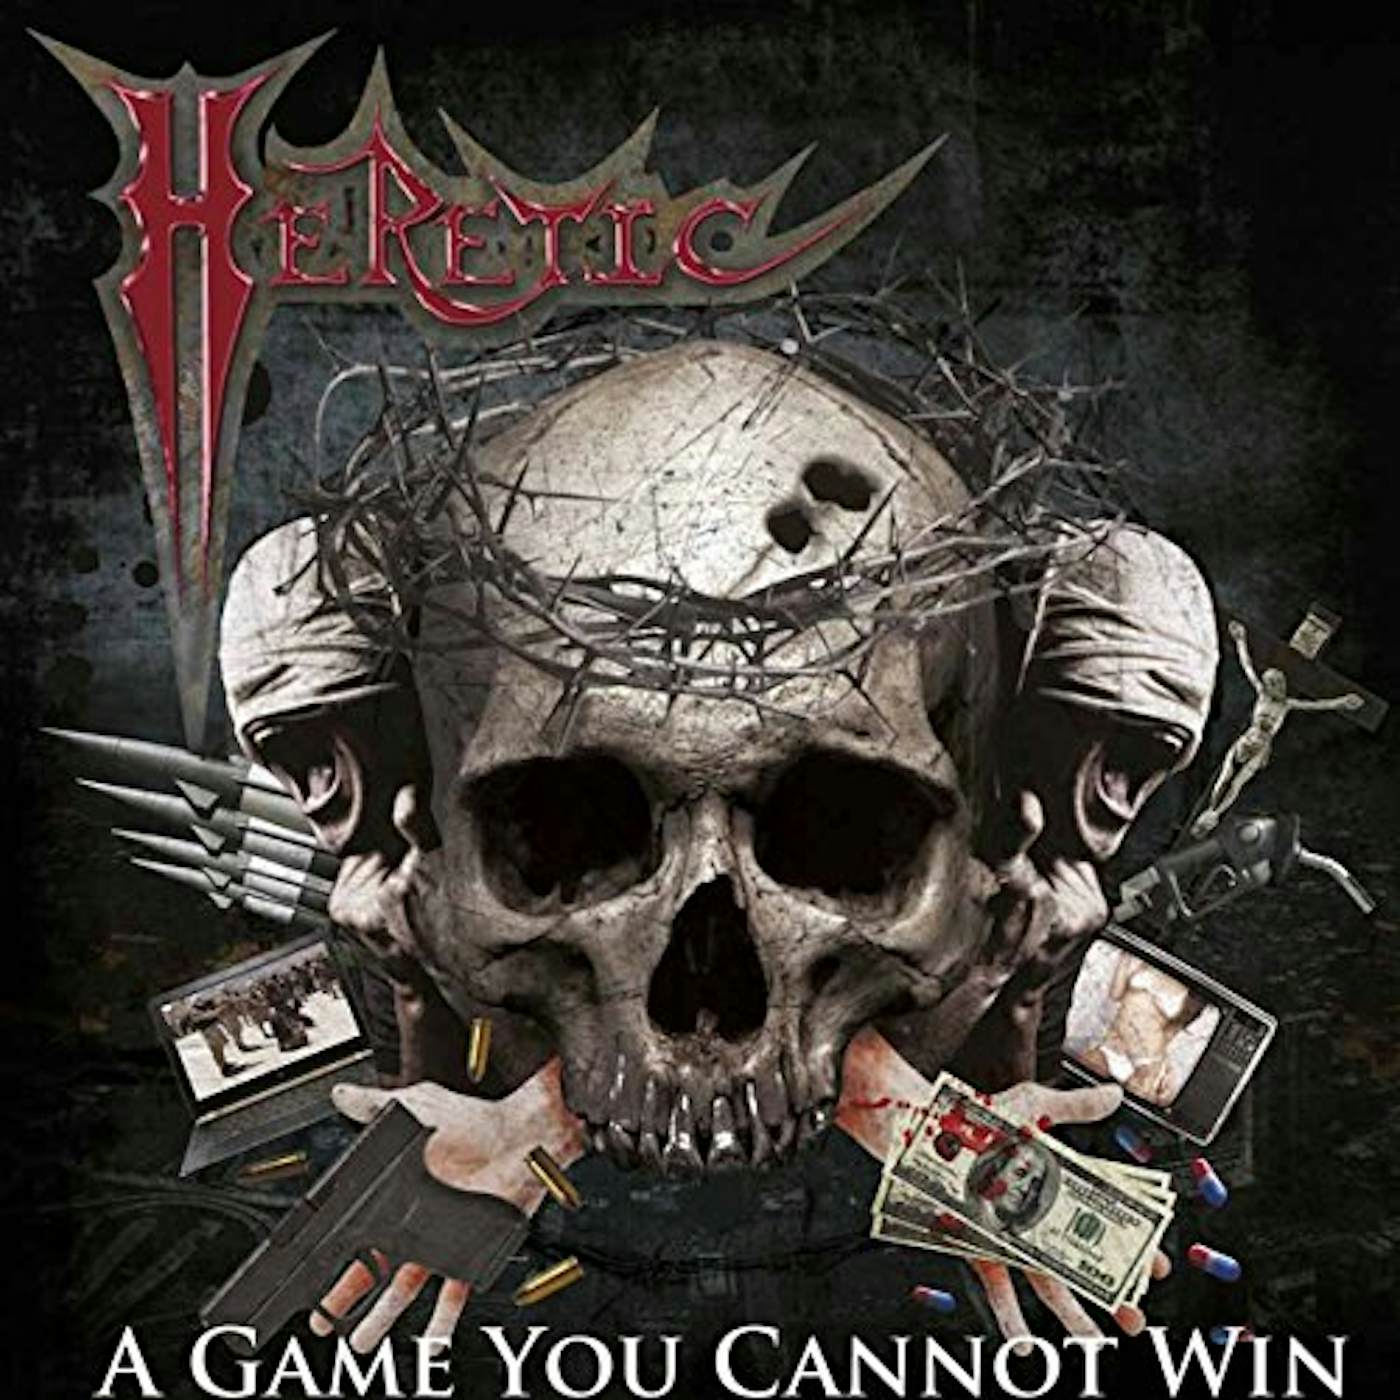 Heretic GAME YOU CANNOT WIN Vinyl Record